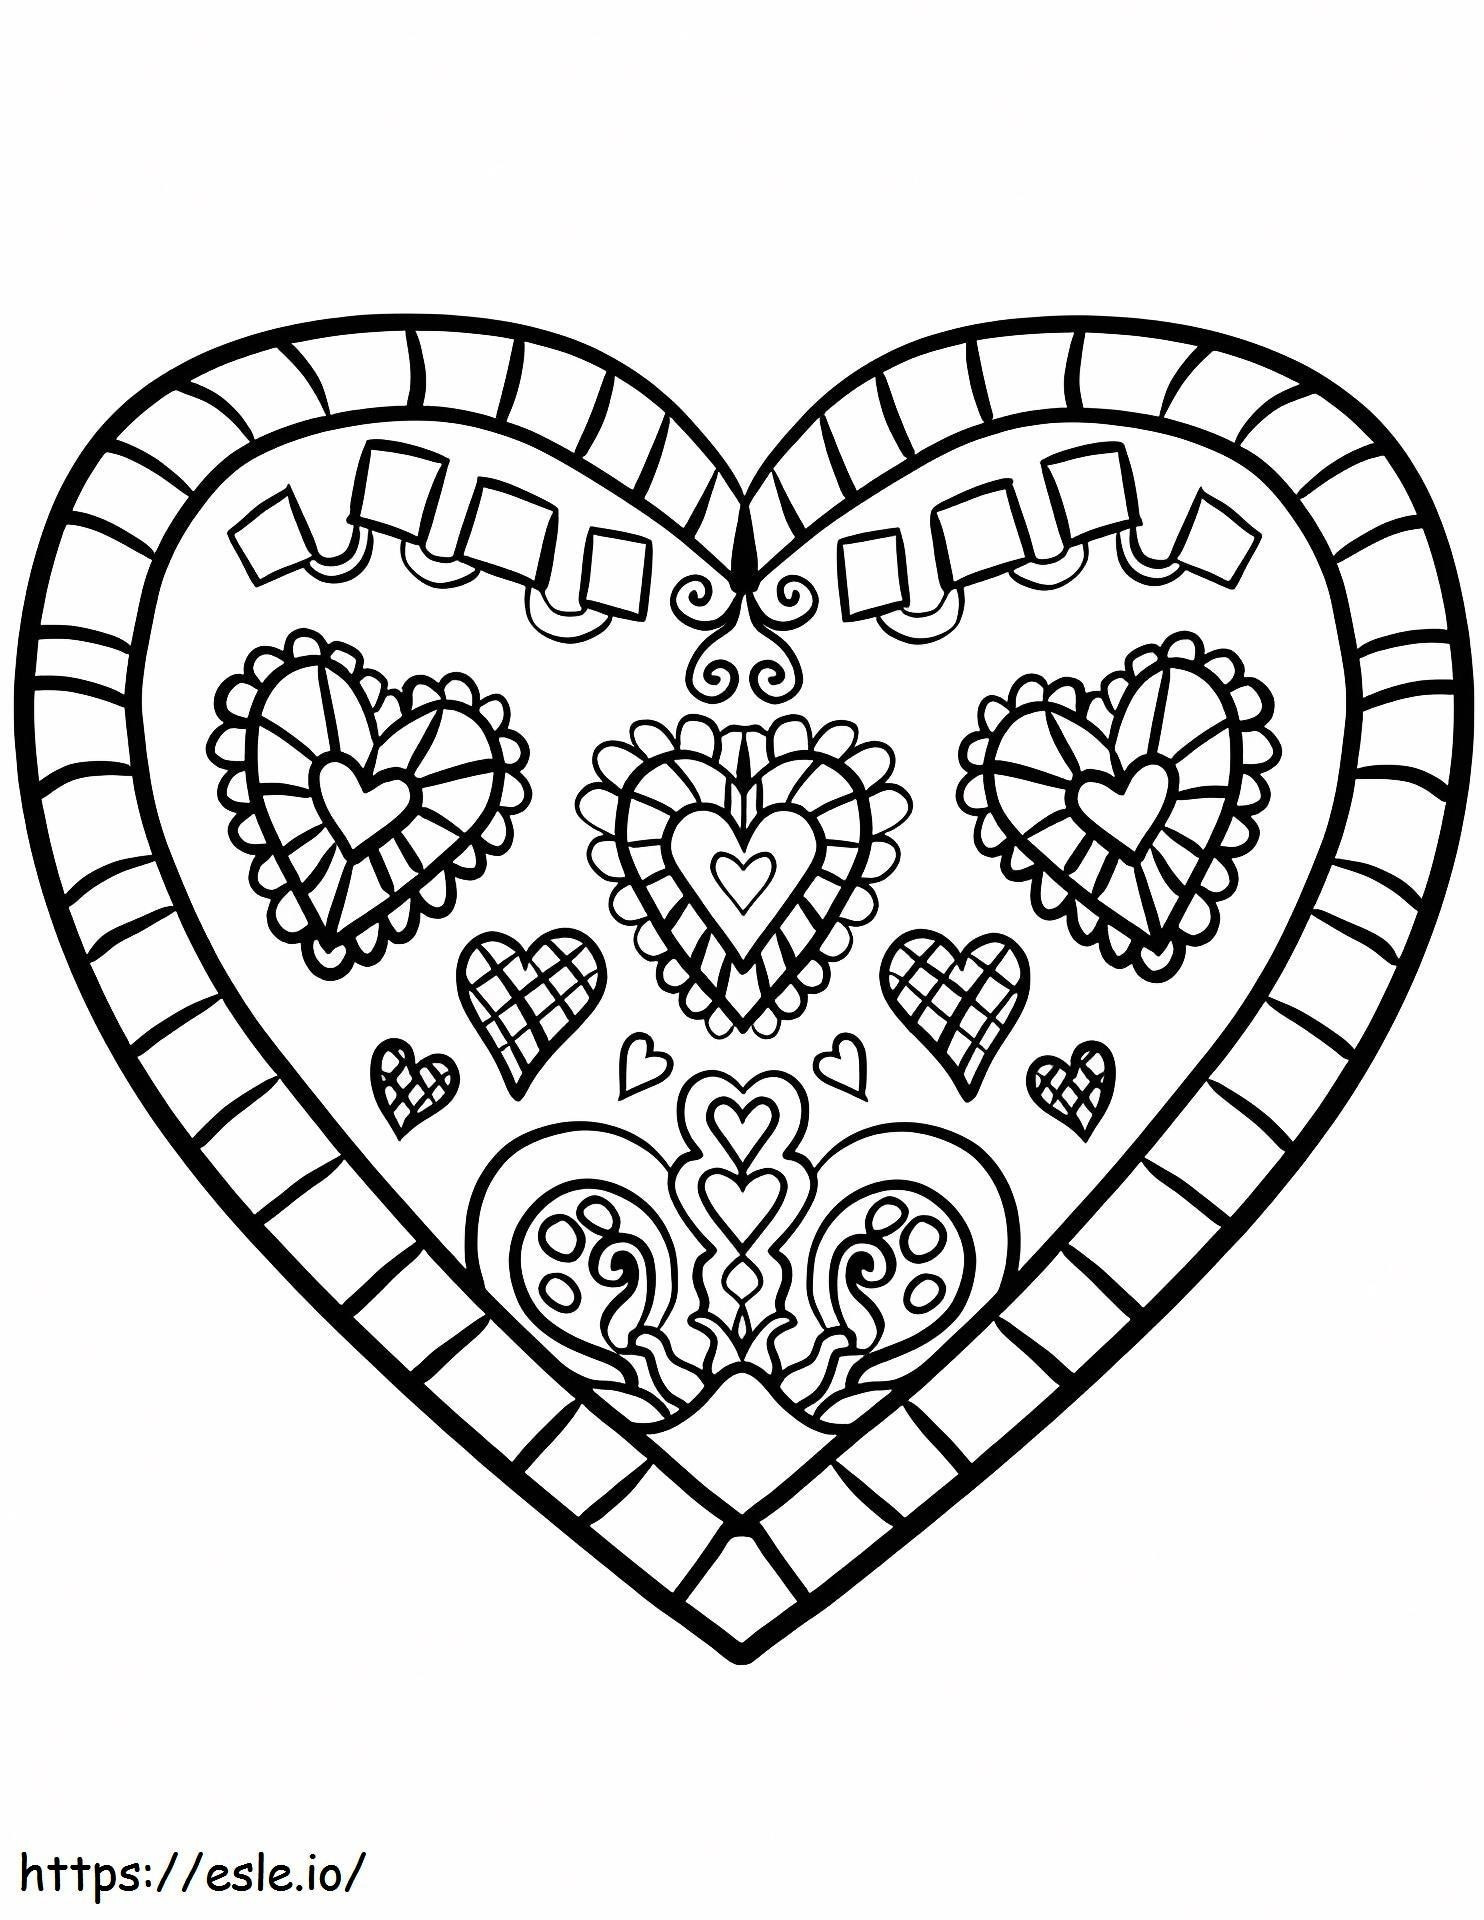 A Heart Decorated coloring page